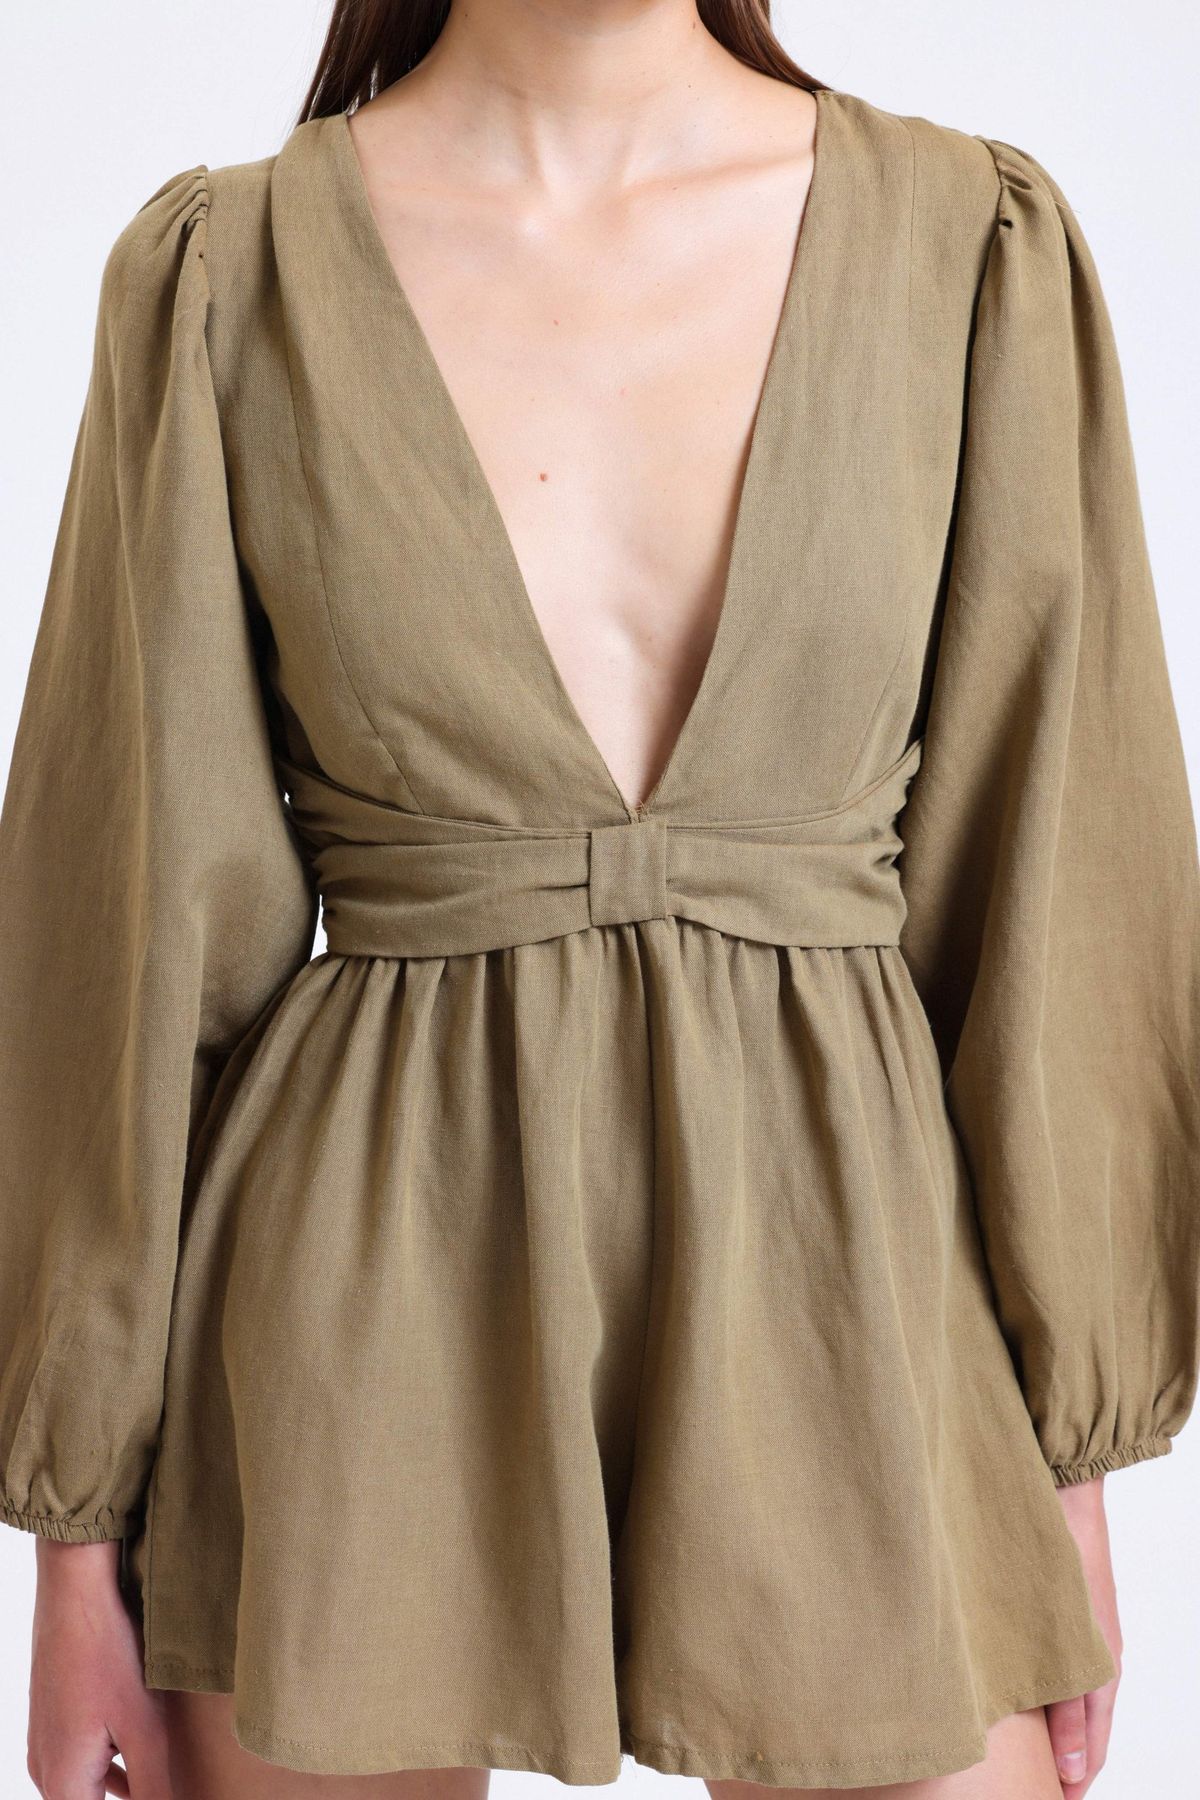 Linen Plunge Neck Long Sleeve Playsuit with a Back Cut Out